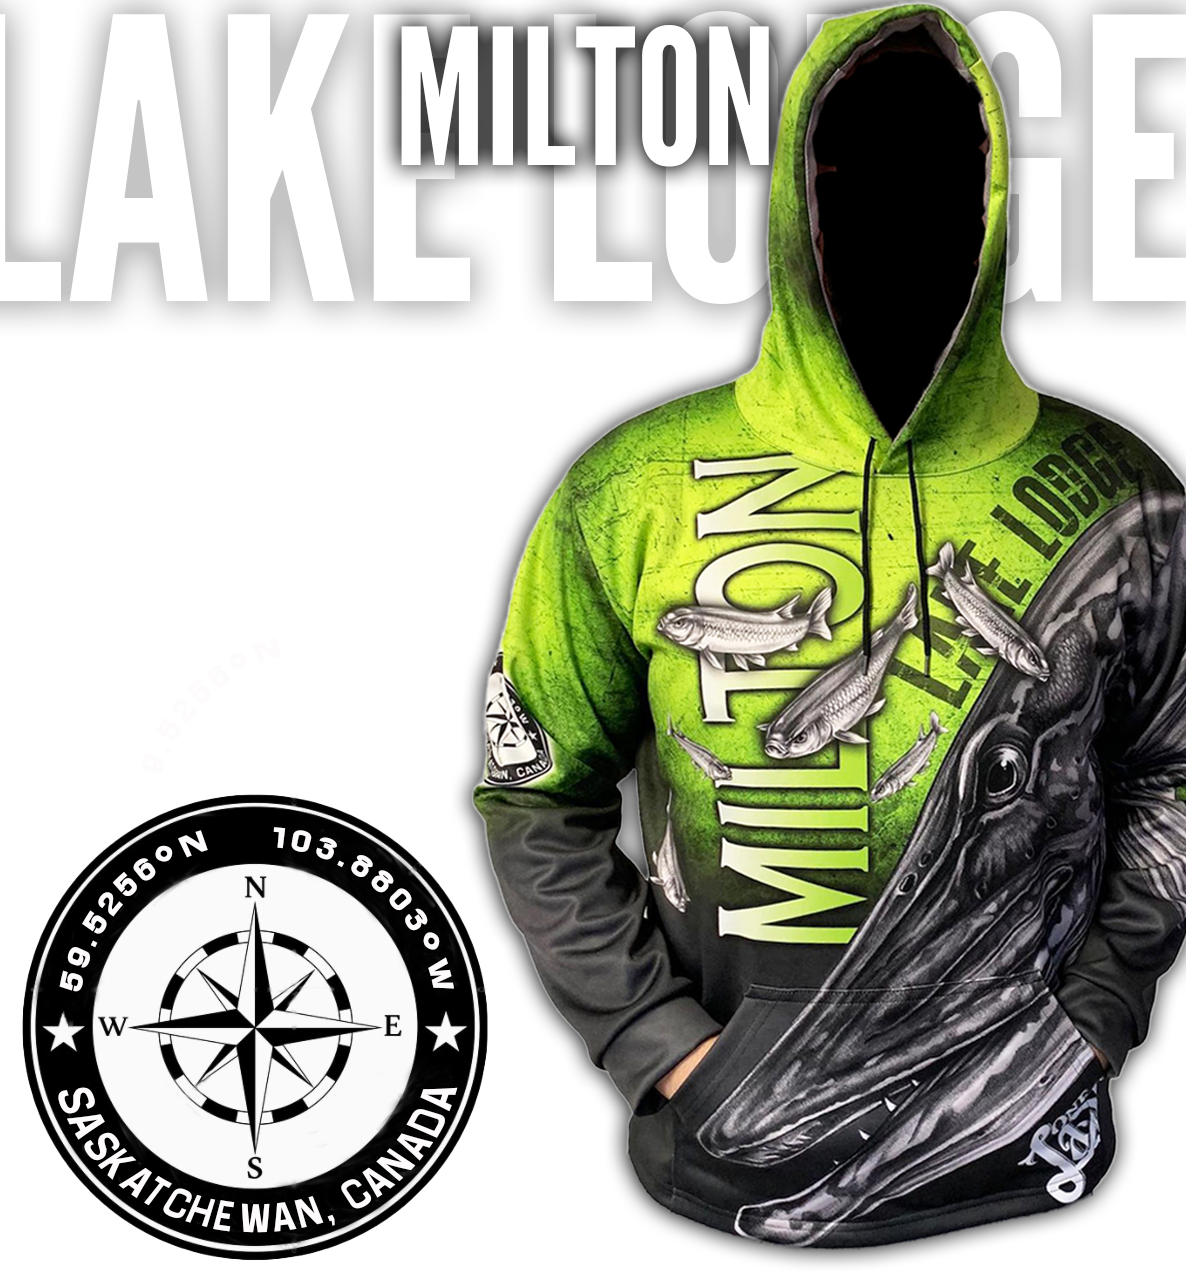 Papermouth Men's Fishing Hoodie - Crappie - One Last Cast Gear